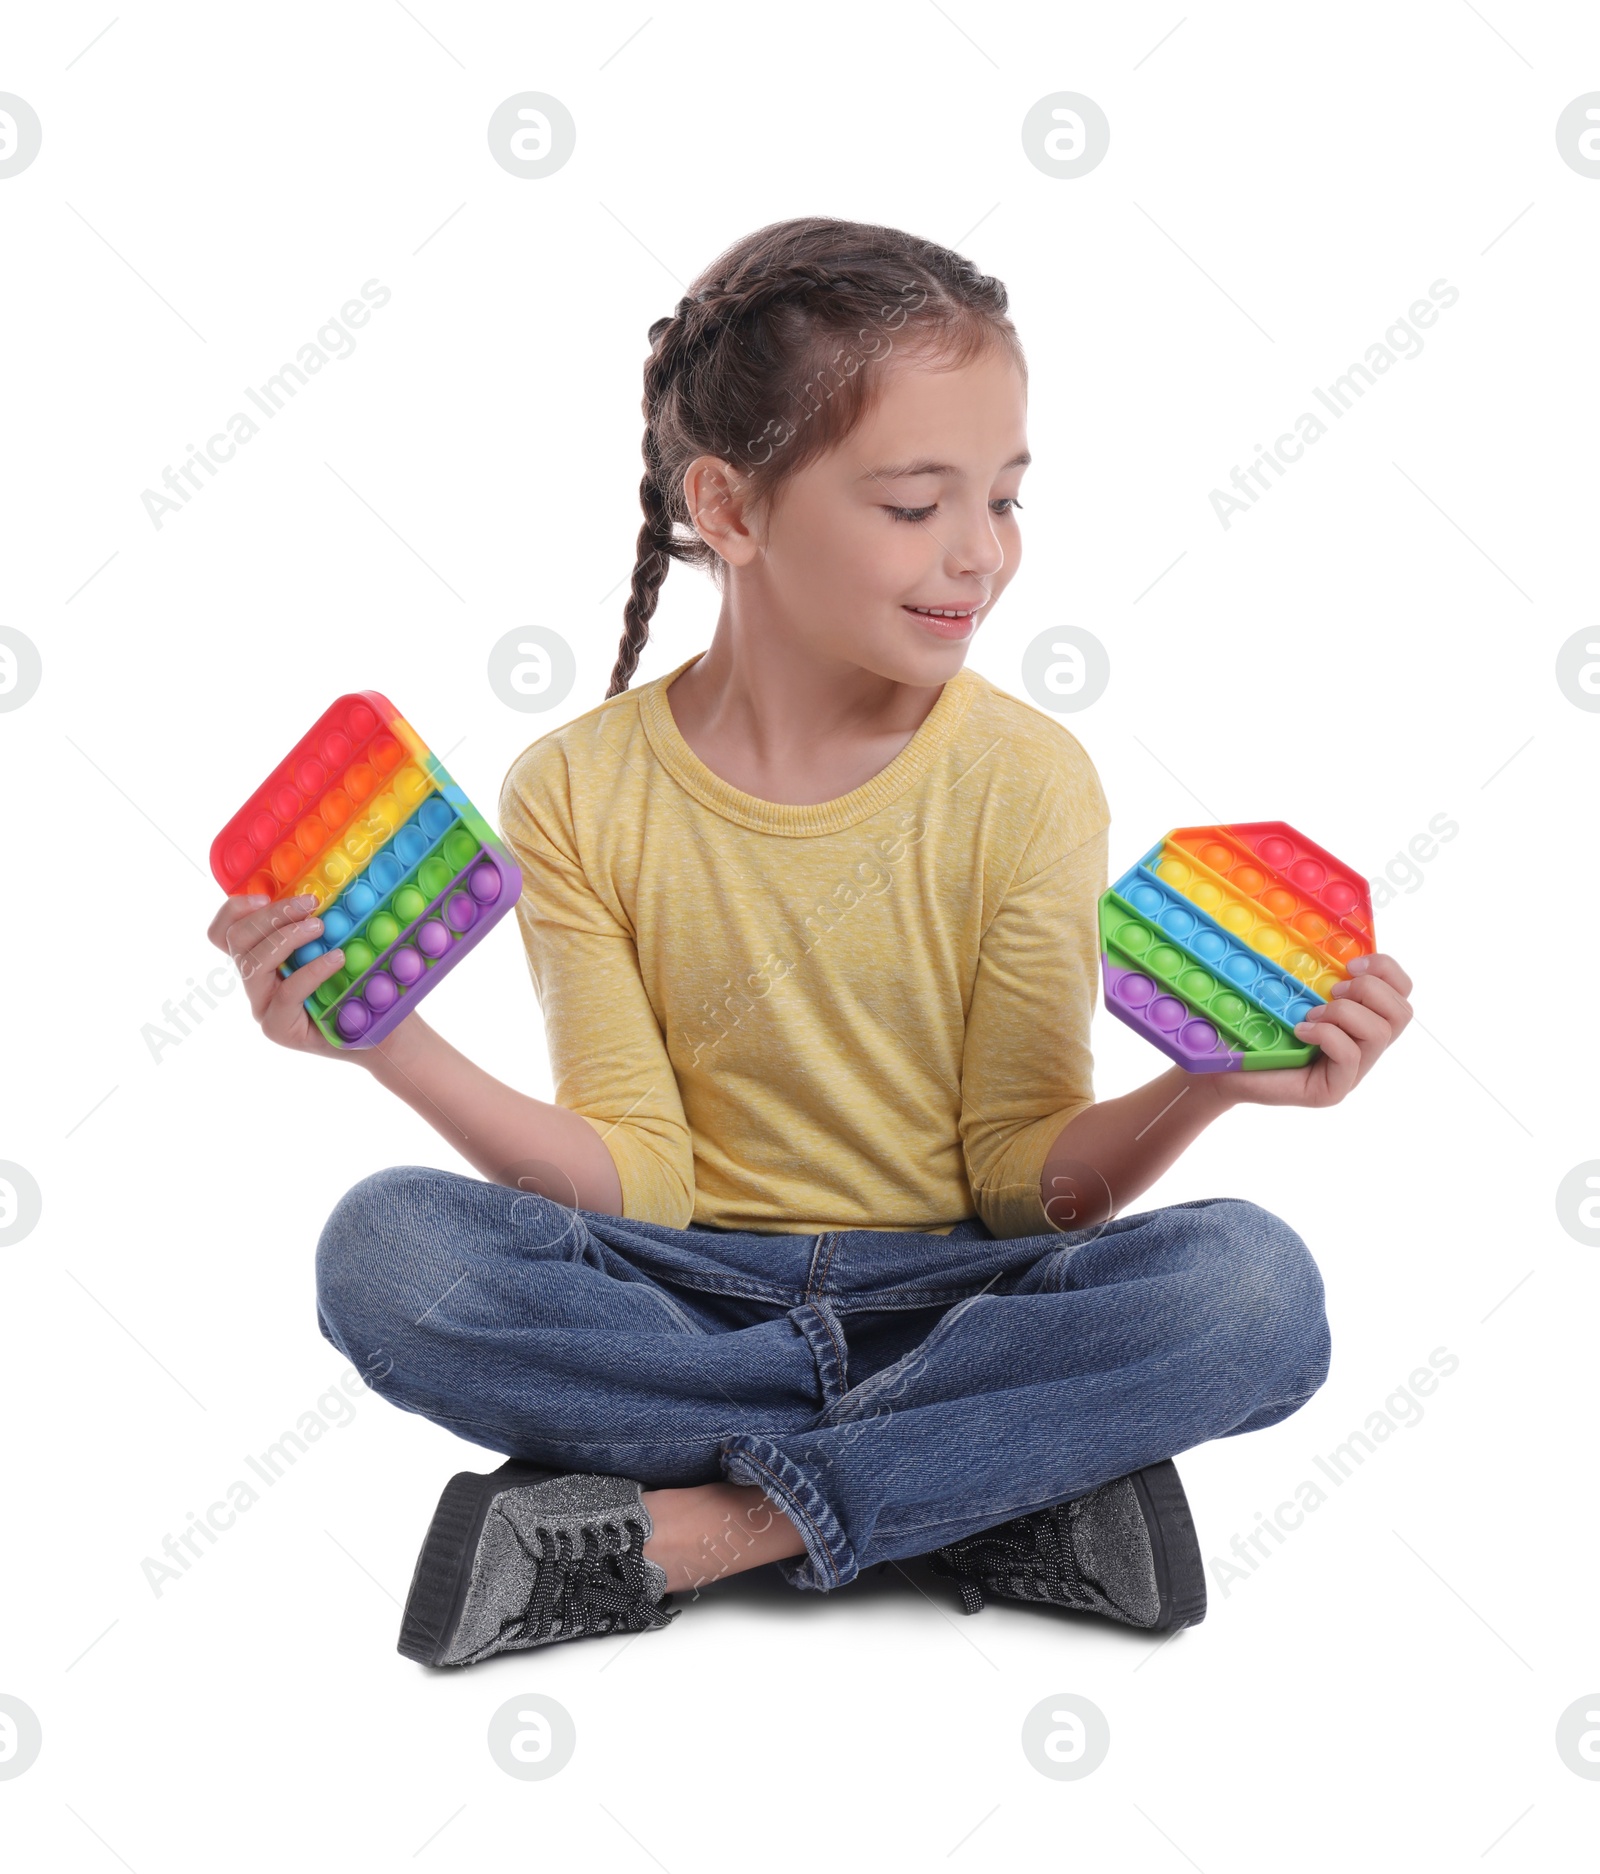 Photo of Little girl with pop it fidget toys on white background